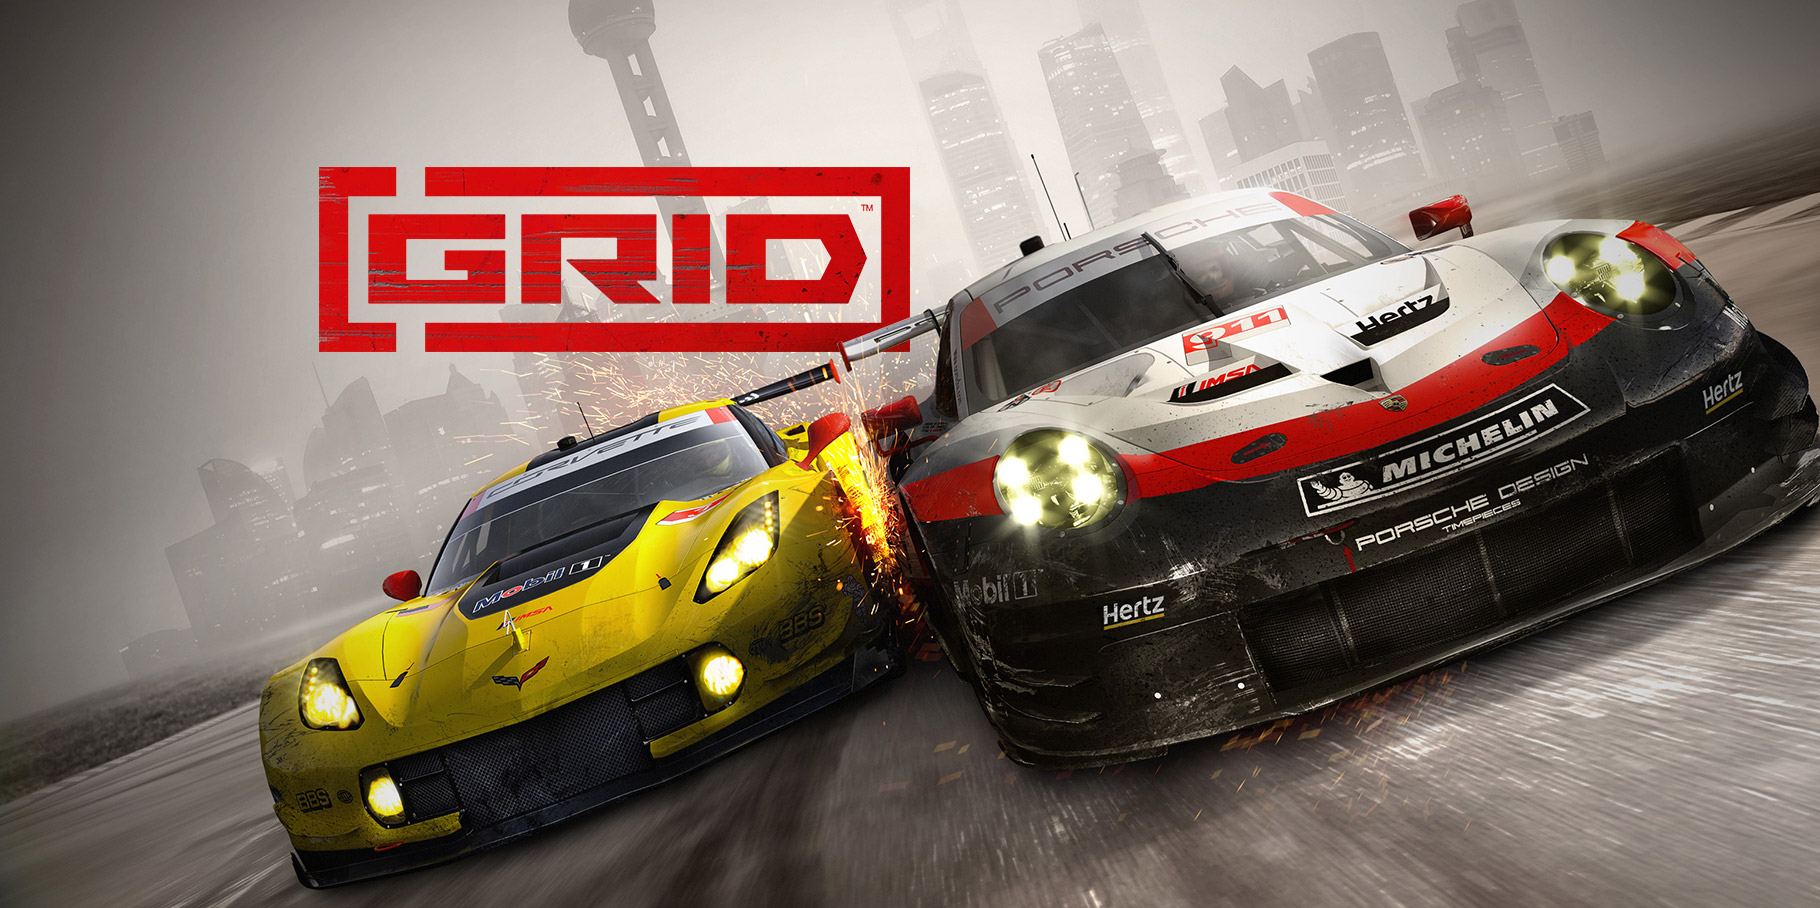 Codemasters And Deep Silver Release New Grid Trailer Detailing Locations And Racing Styles